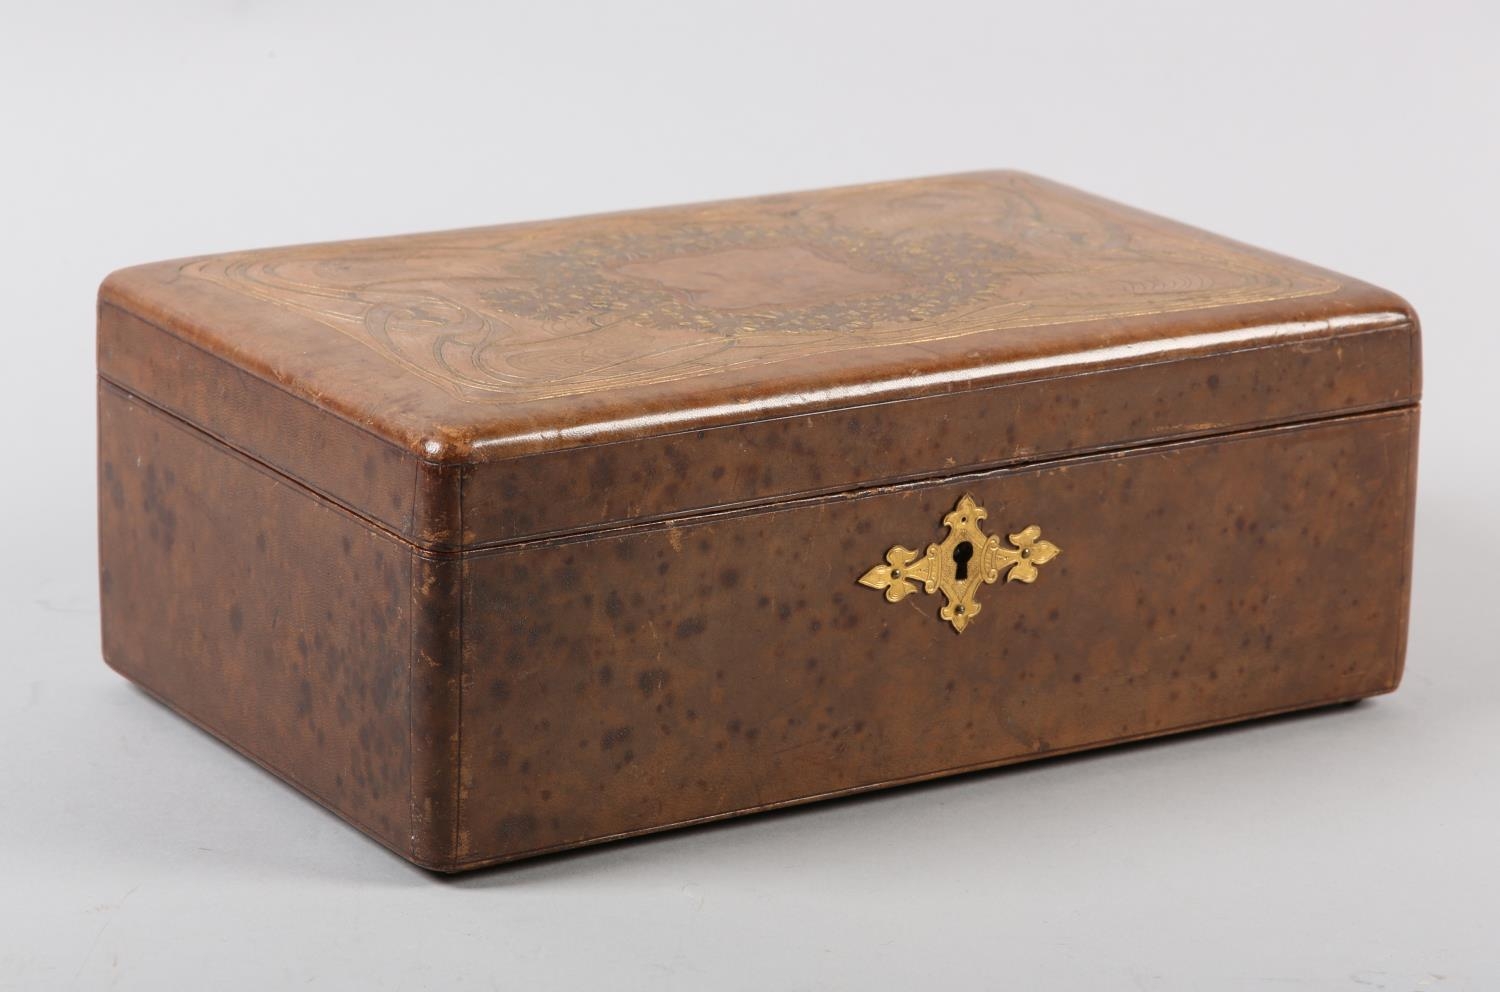 AN ART NOUVEAU BROWN LEATHER BOX, rectangular, the lid gilt tooled with plant forms and ribbon